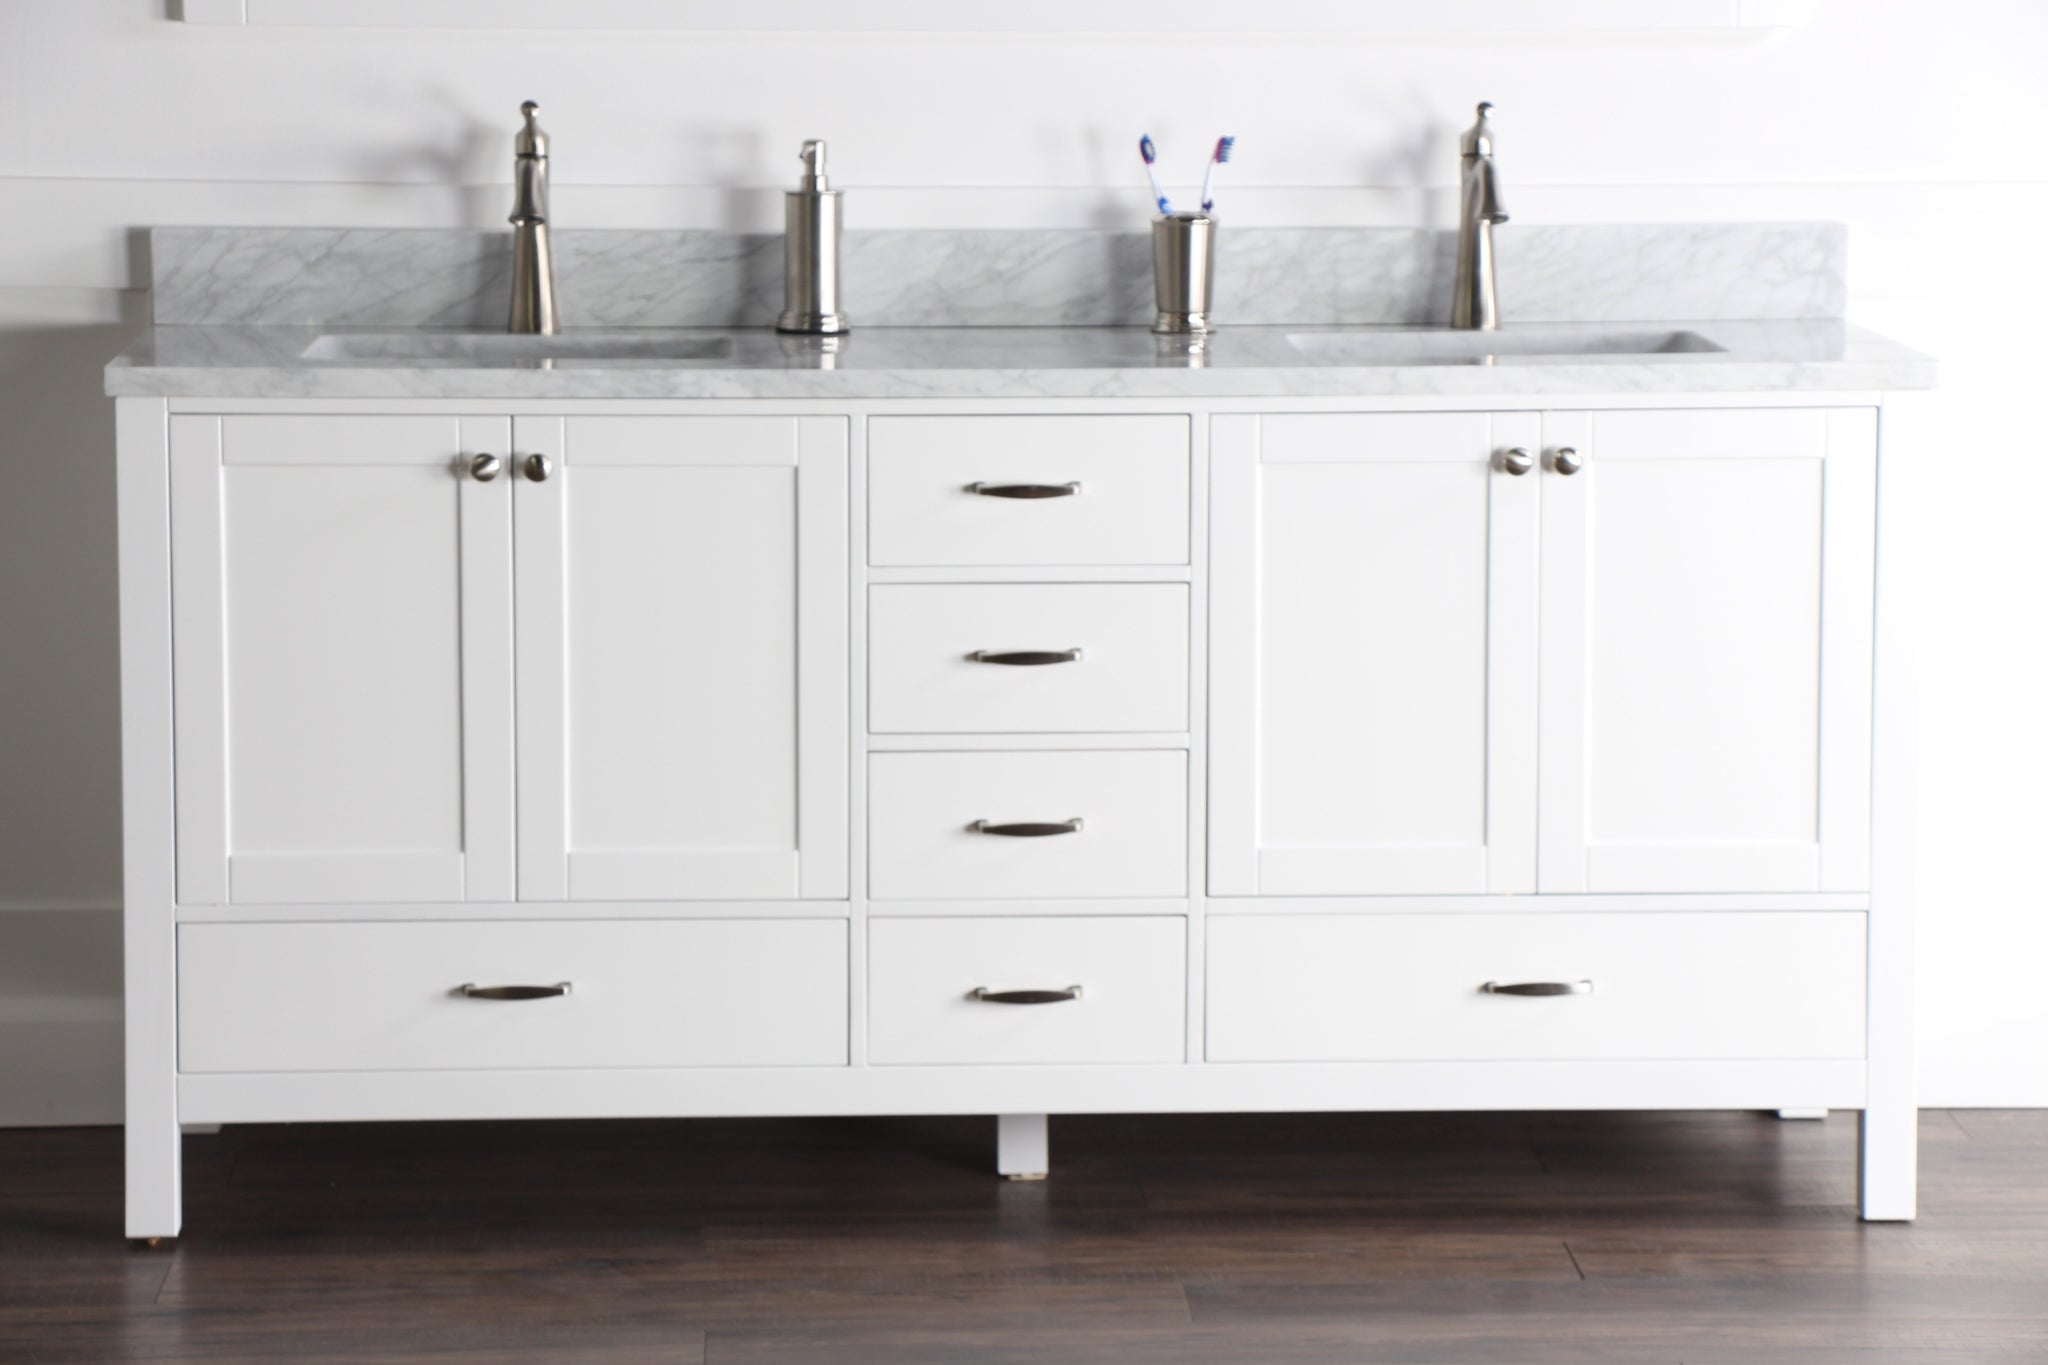 Abigail 72", Naos, Bright White Bathroom Vanity with 3cm Bianco Carrara Marble Top, Double Sink